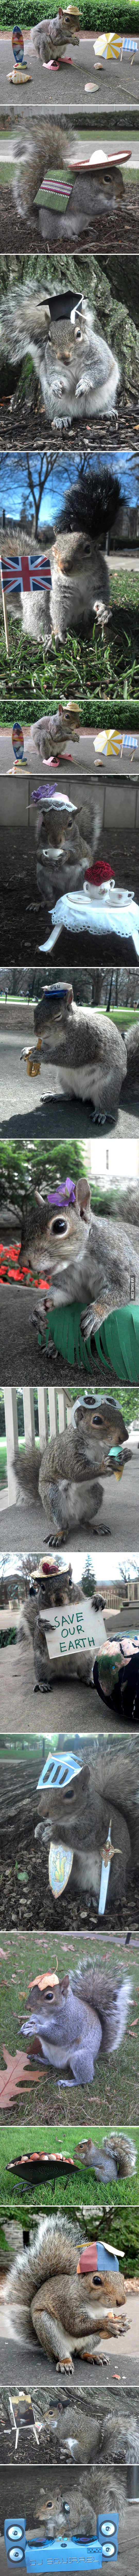 Student Befriends Squirrels On Campus And Dresses Them In Cute Costumes